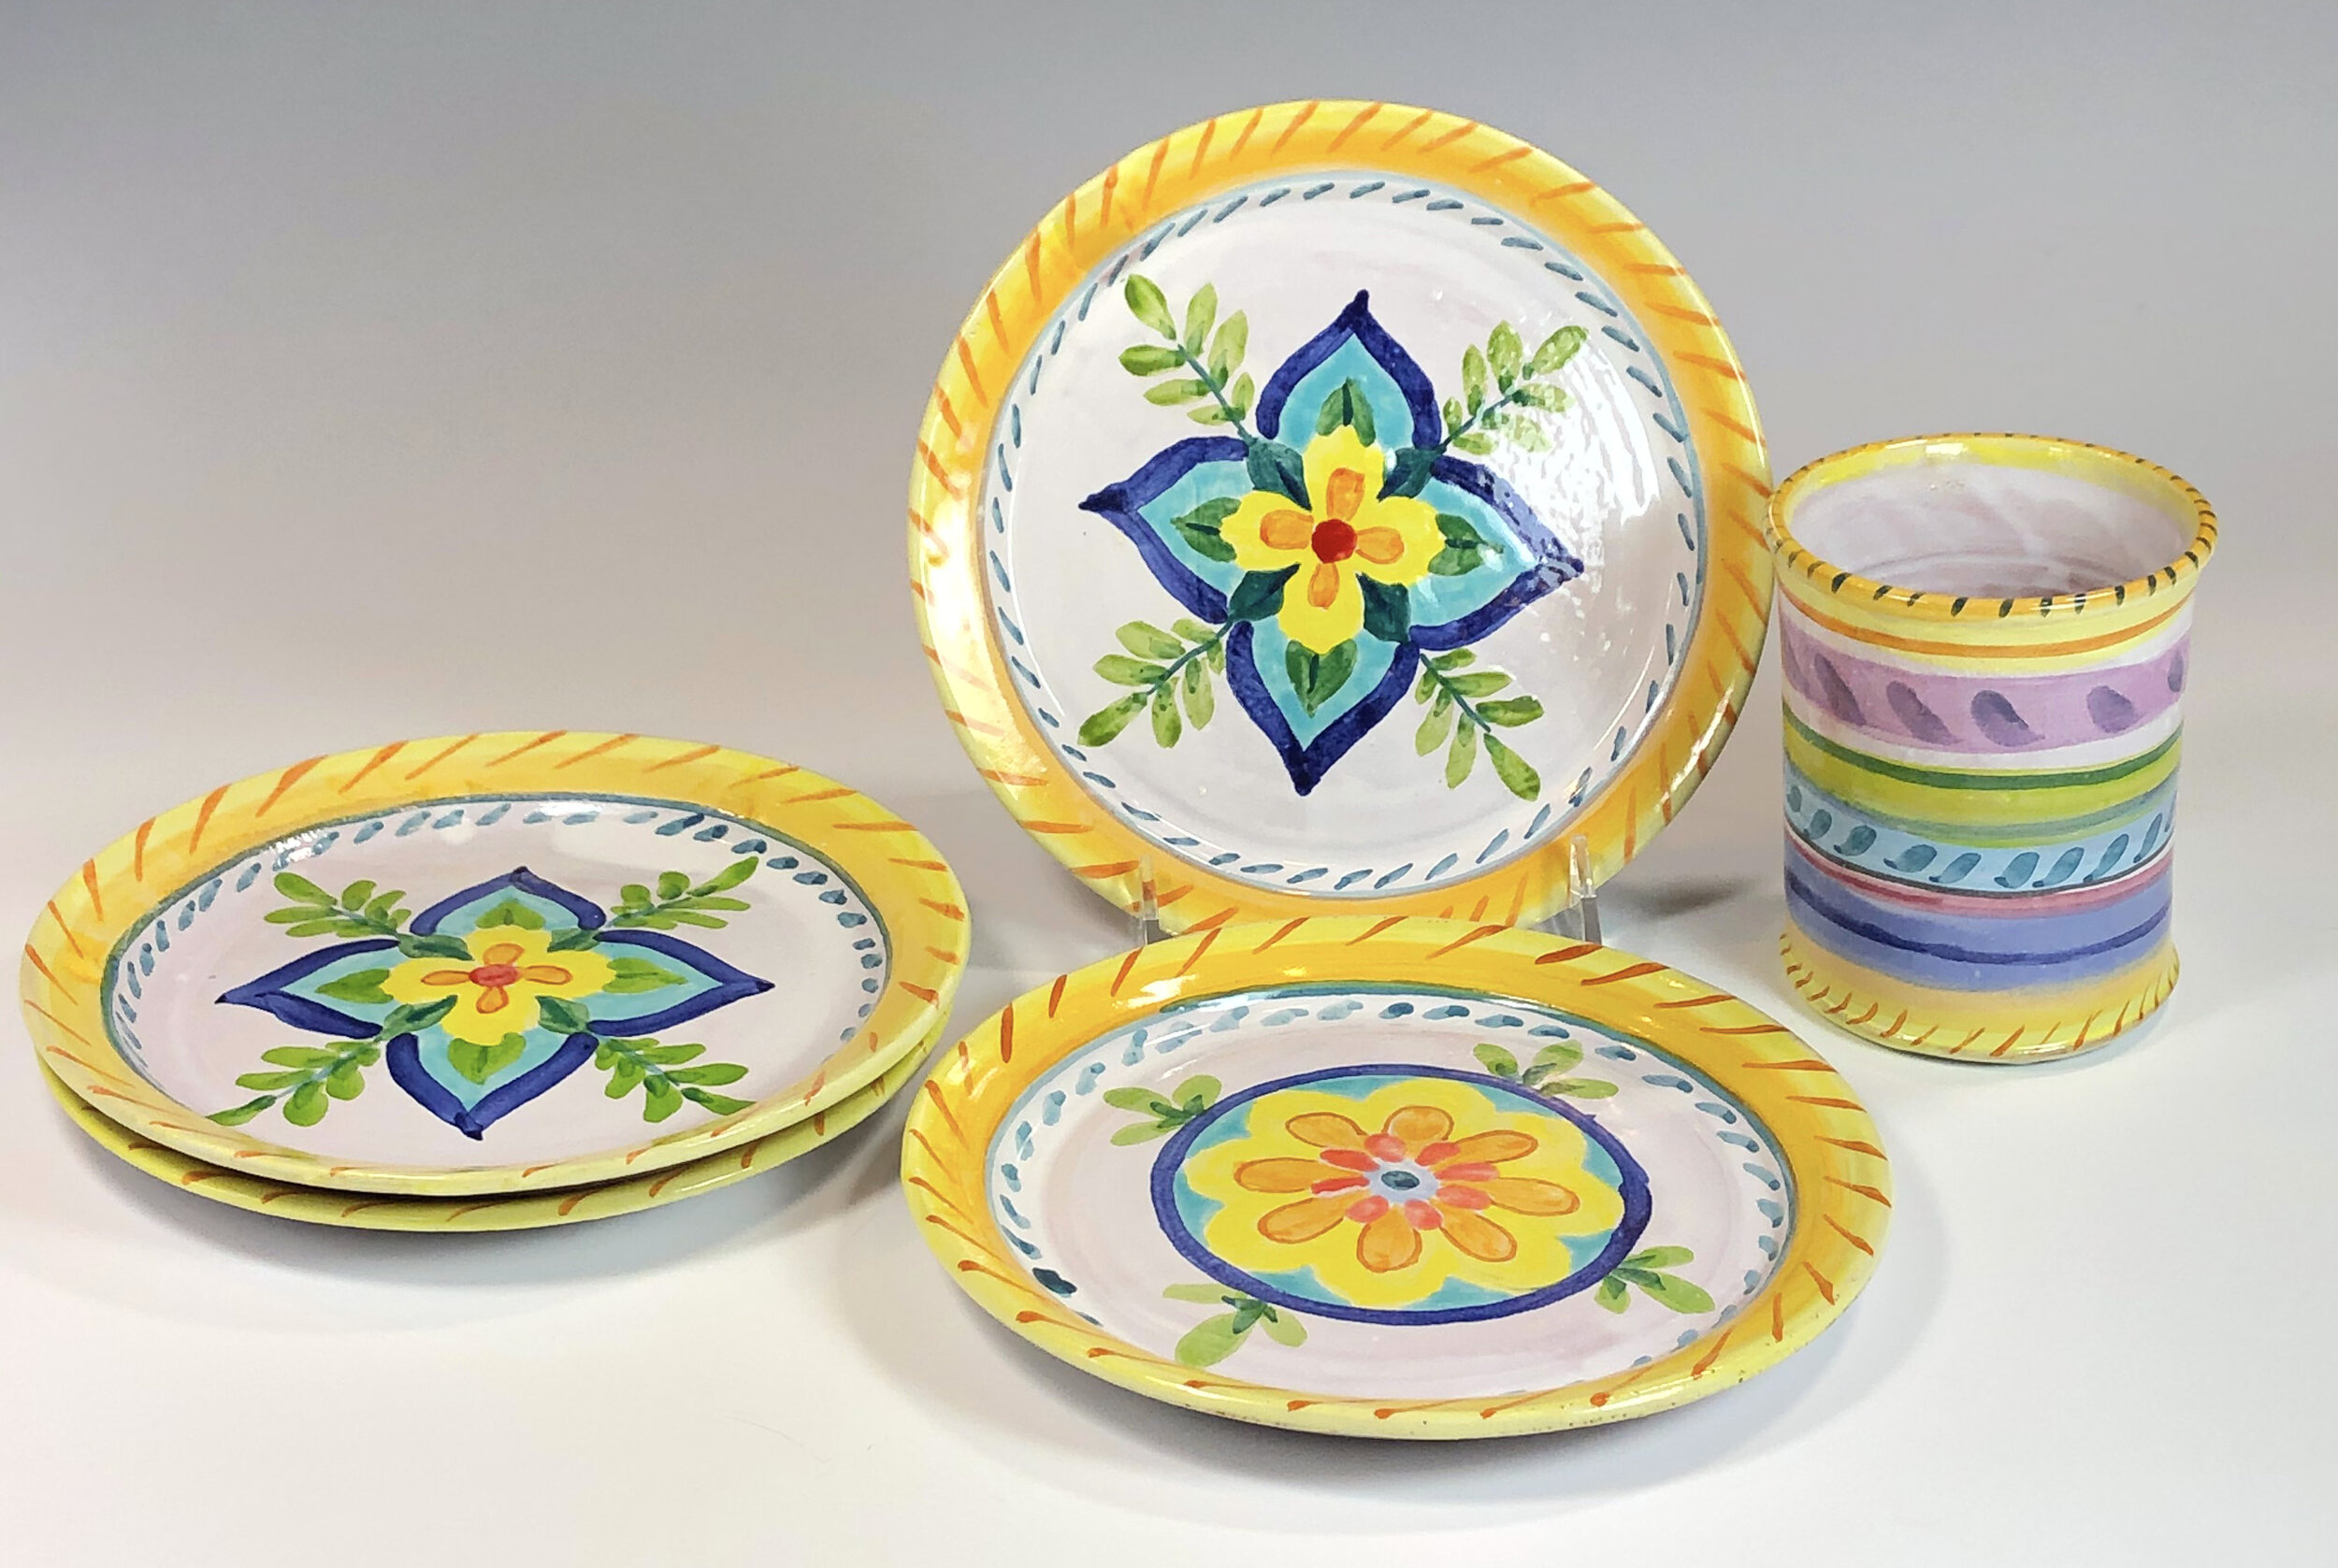 Yellow Plates with tiles collection with Cup.jpg